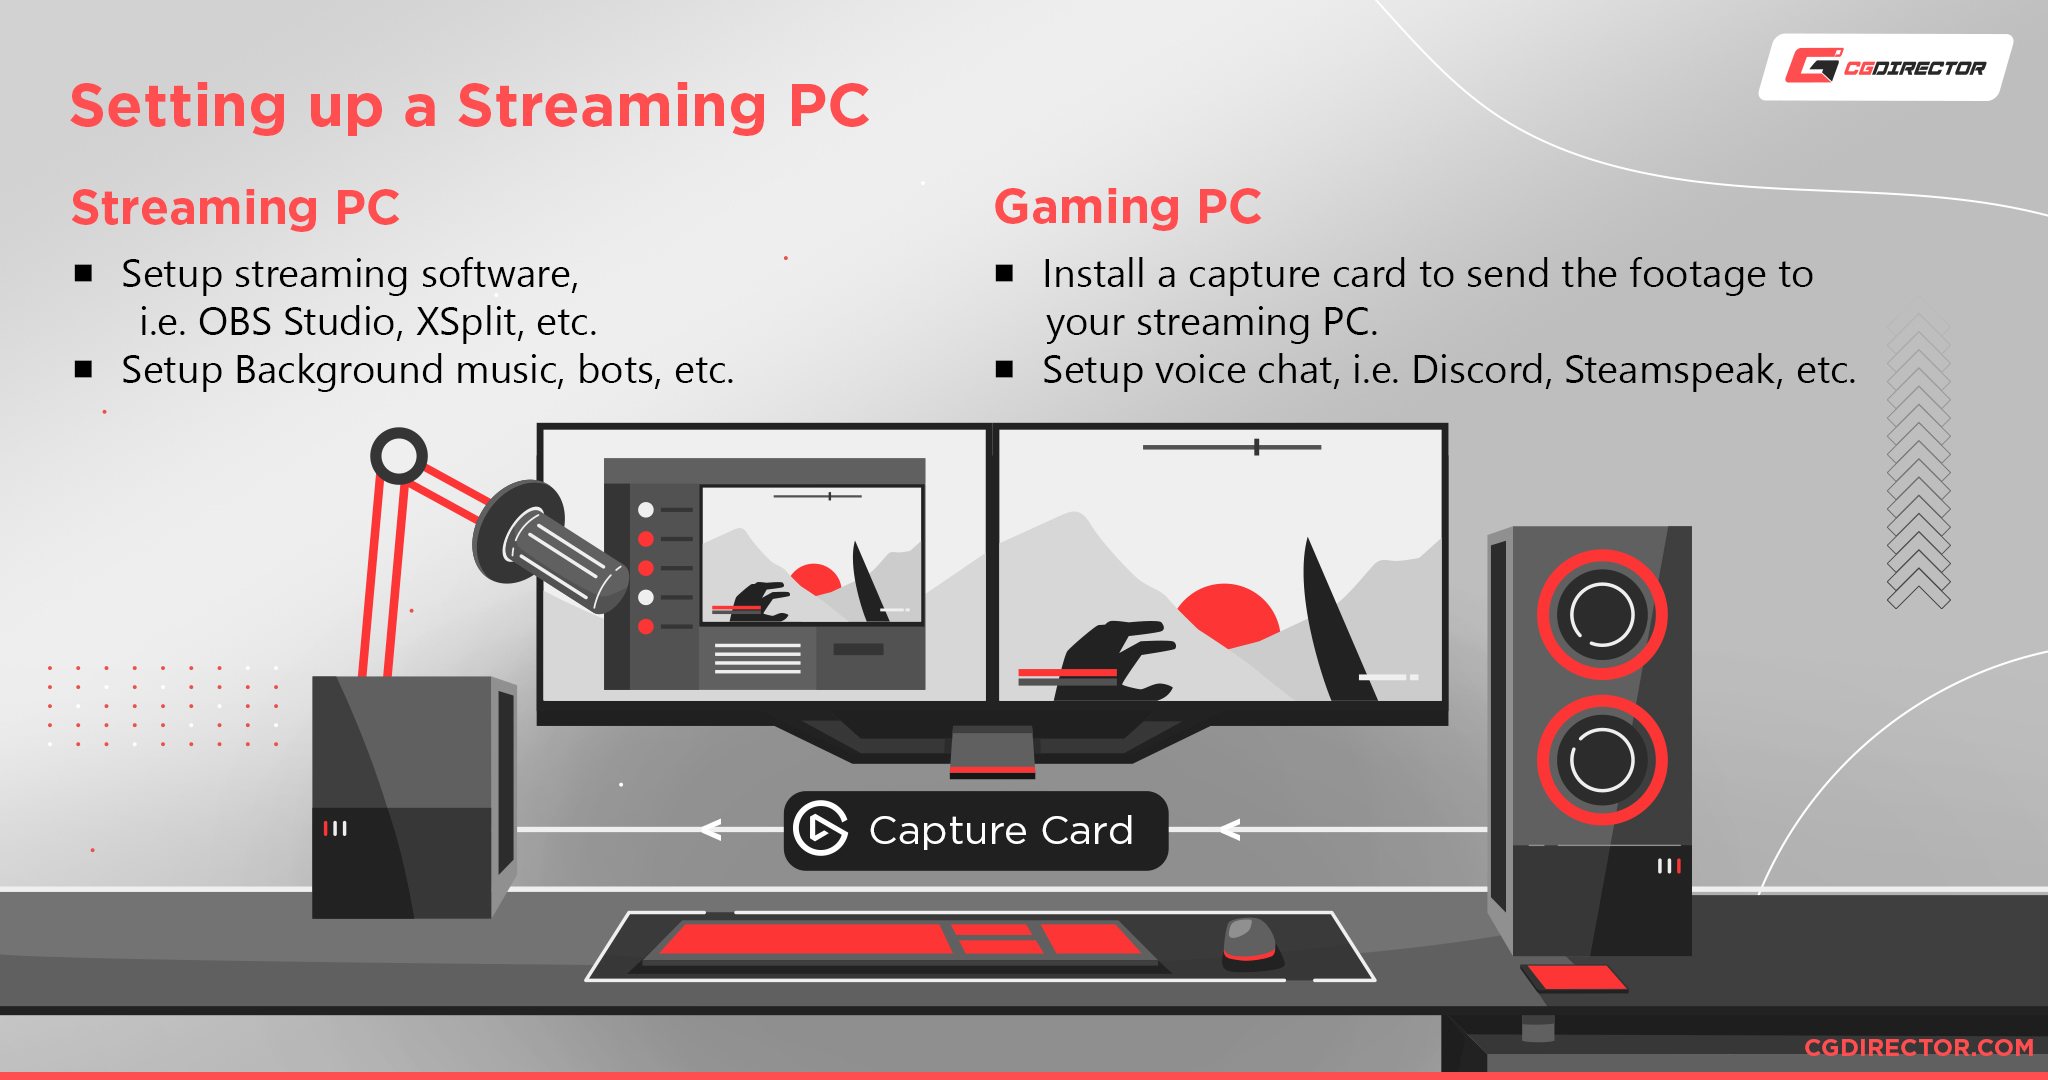 How to setup a secondary streaming PC